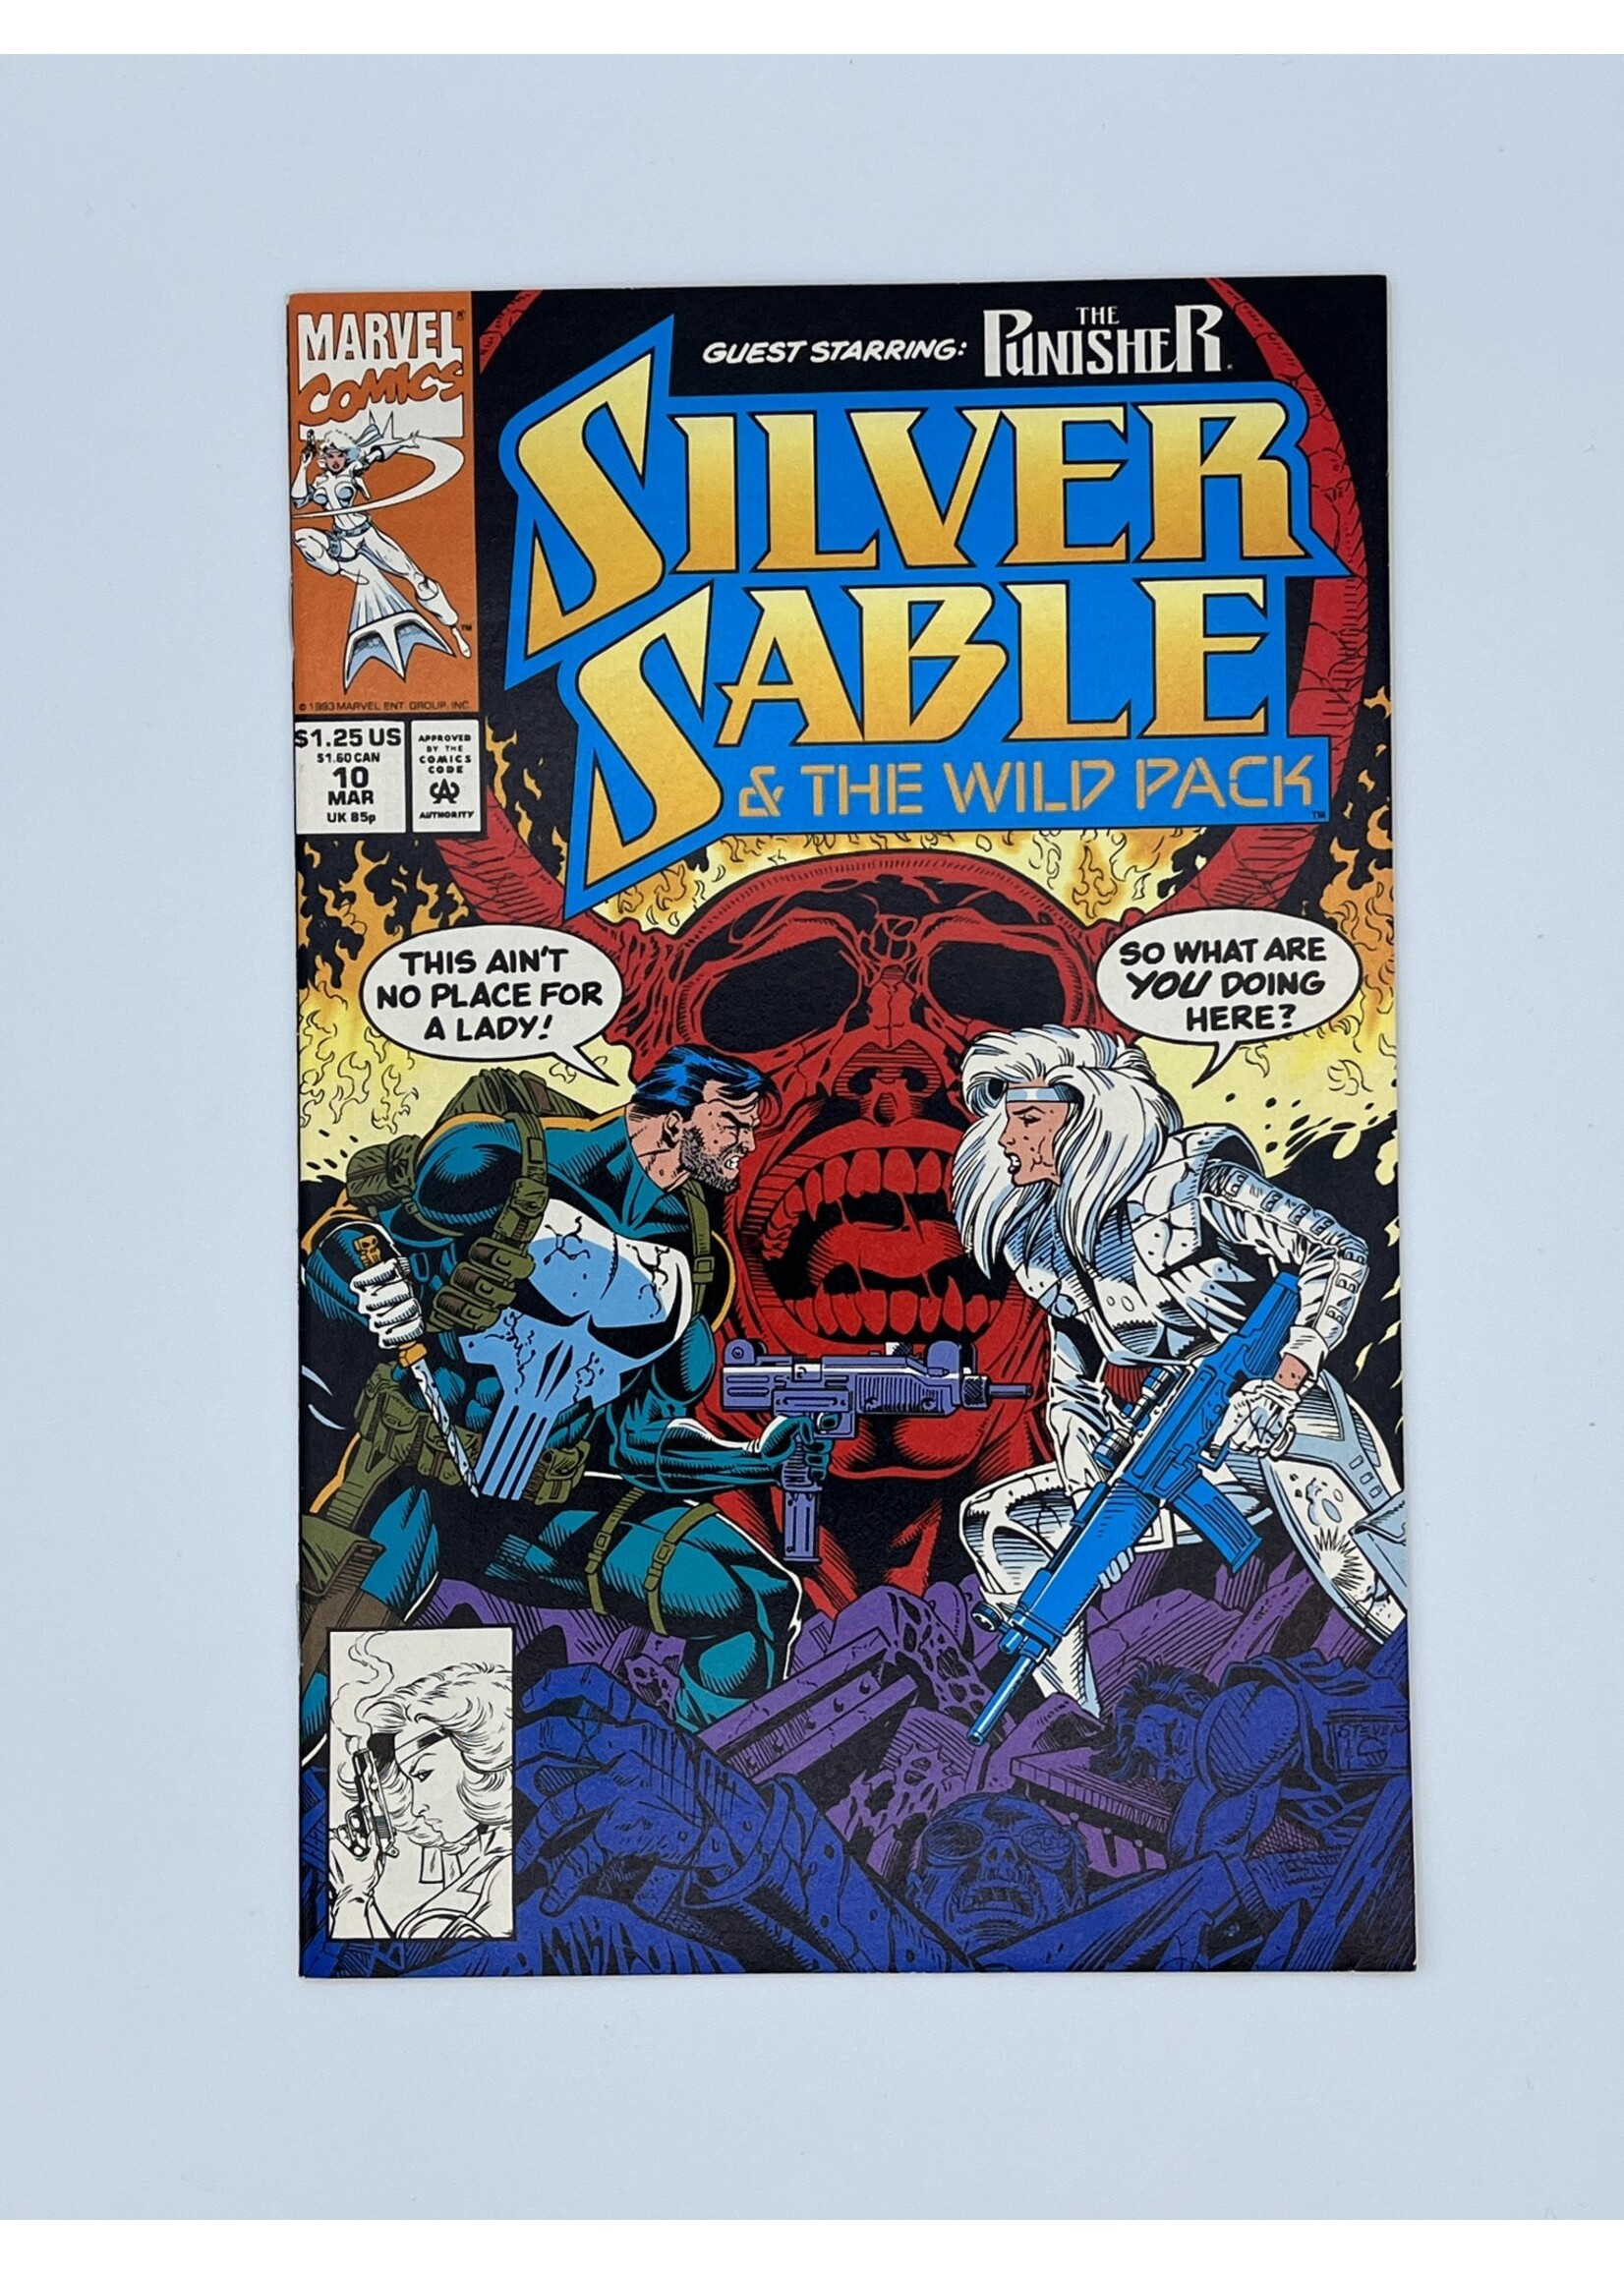 Marvel SILVER SABLE And THE WILD PACK #10 Marvel March 1993